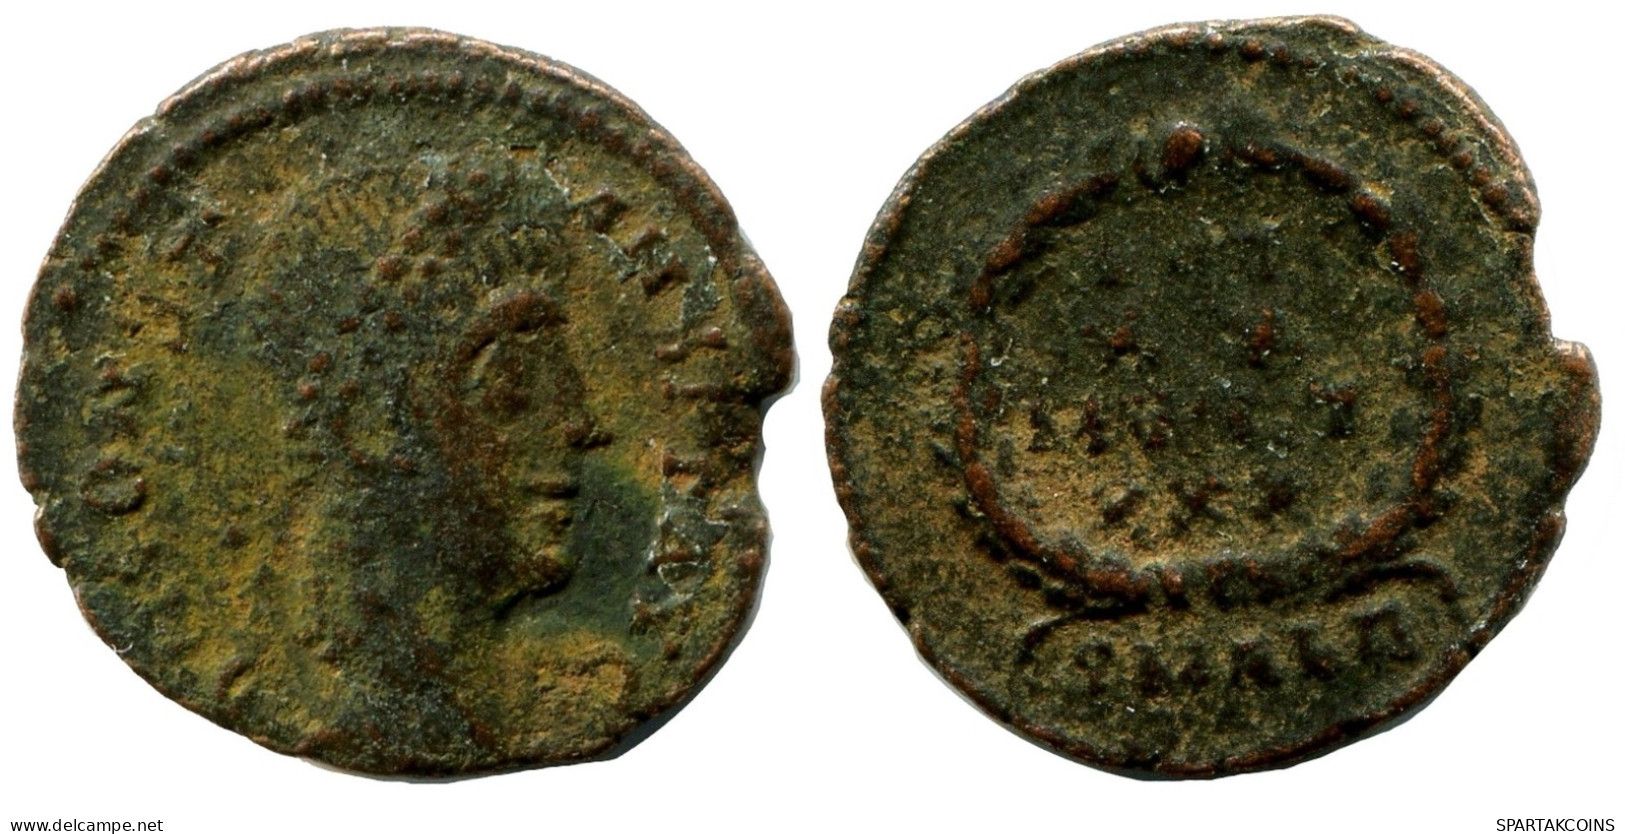 CONSTANS MINTED IN ALEKSANDRIA FOUND IN IHNASYAH HOARD EGYPT #ANC11478.14.E.A - The Christian Empire (307 AD To 363 AD)